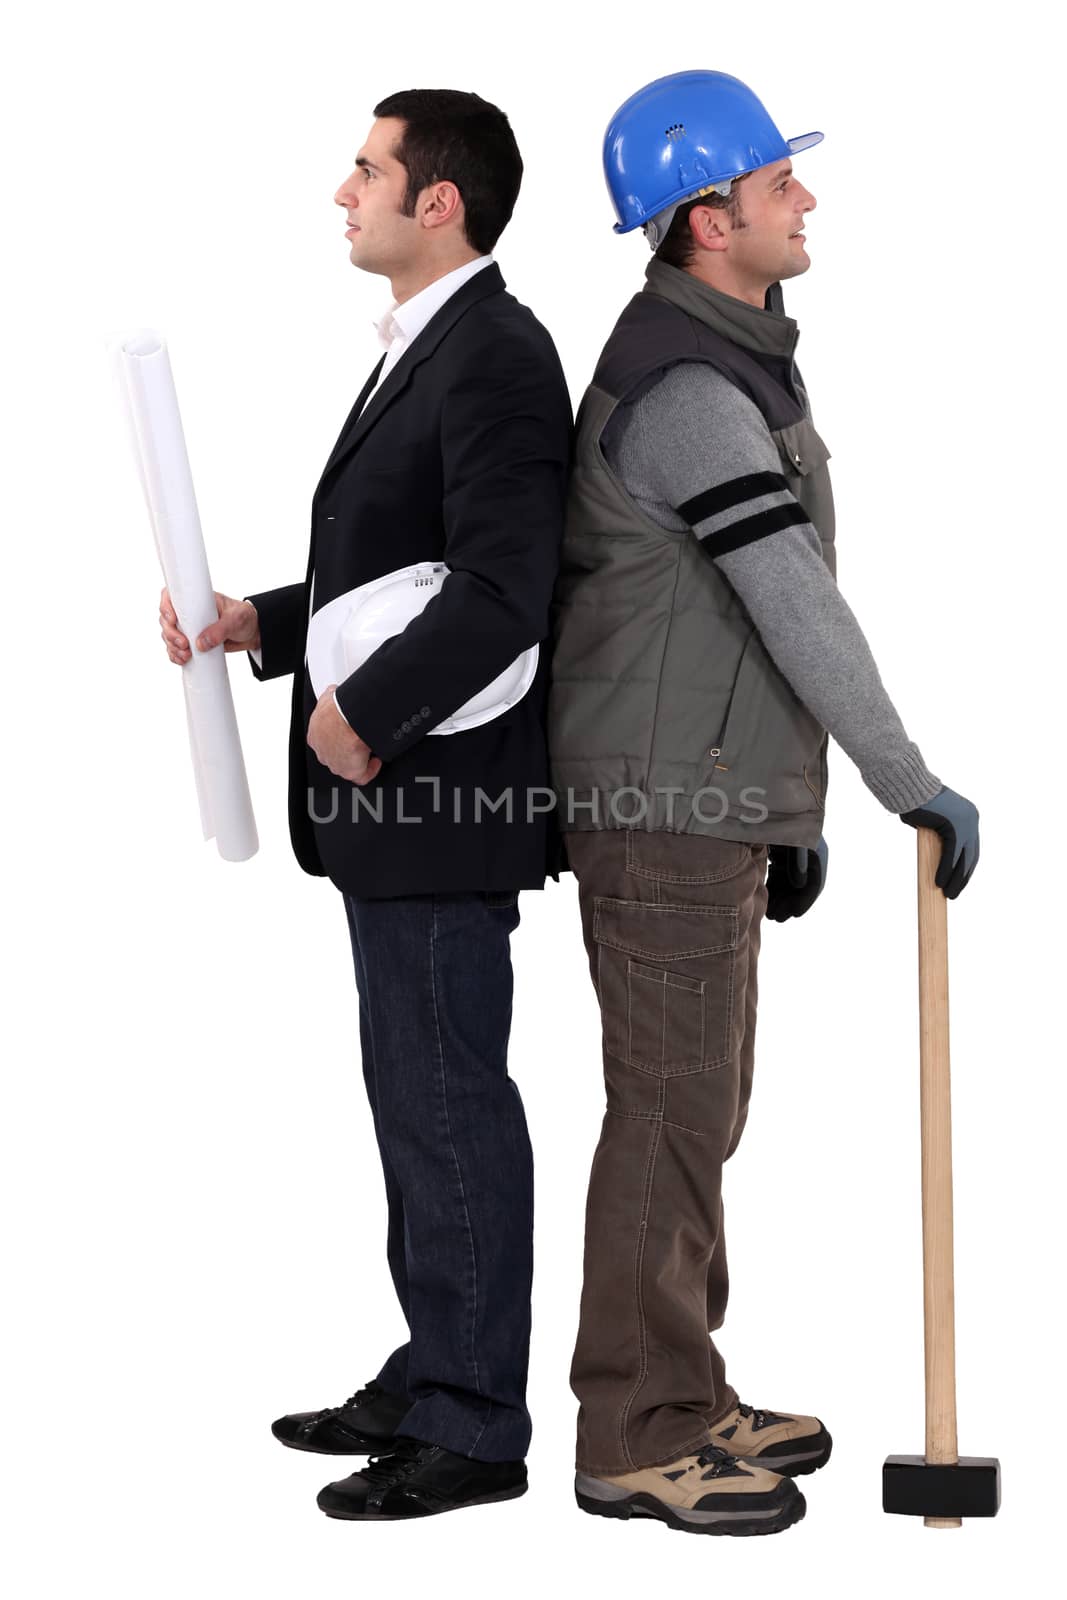 Architect and construction worker standing back to back